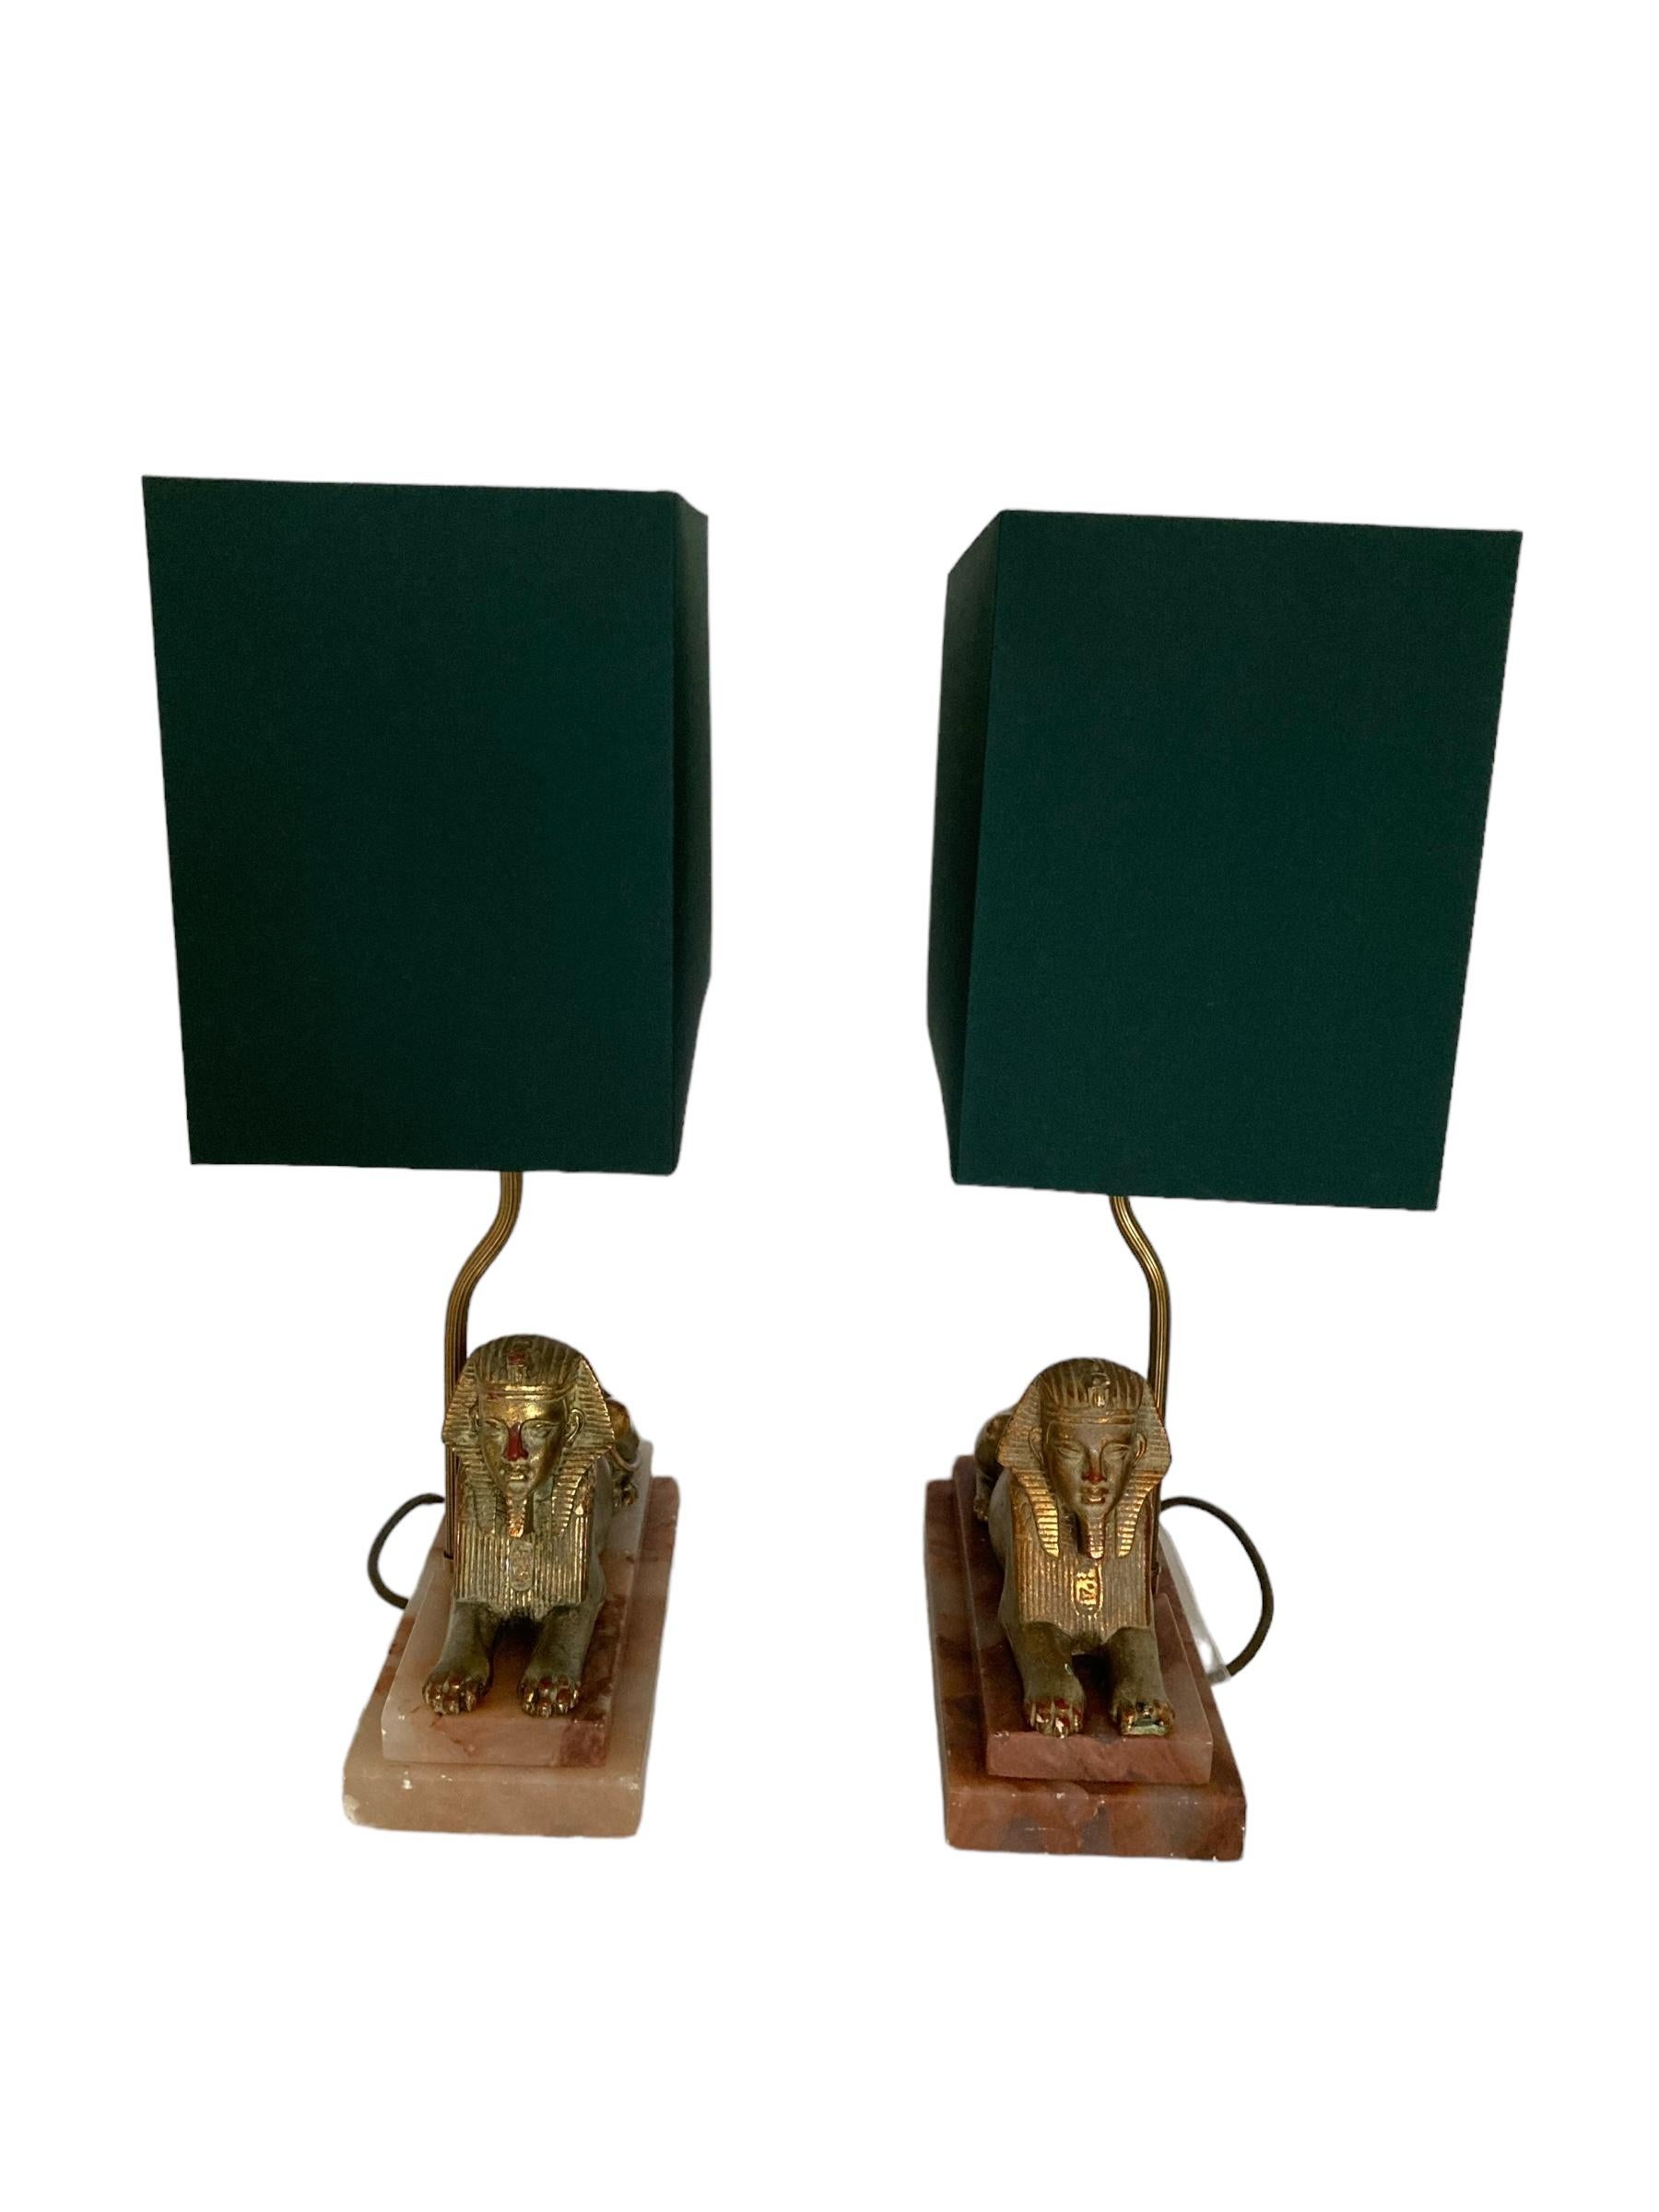 French A Pair of Art Deco Egytian Sphinx Table Lamps on a Marble Base Dark Green Shades